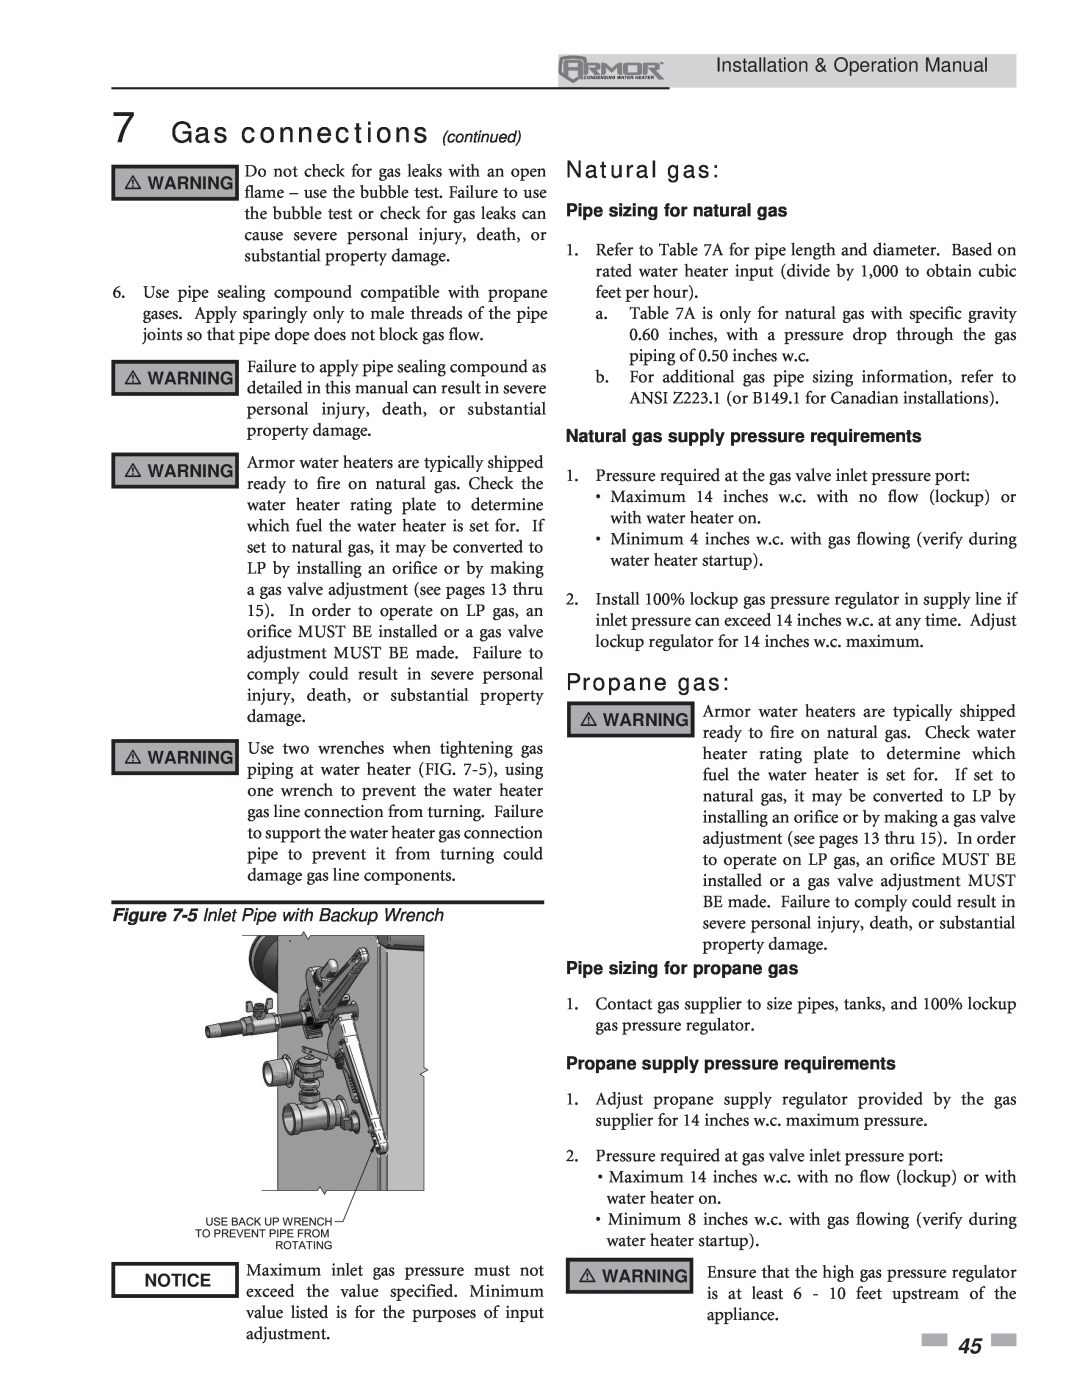 Lochinvar 151 operation manual Gas connections continued, Natural gas, Propane gas, Pipe sizing for natural gas, Notice 